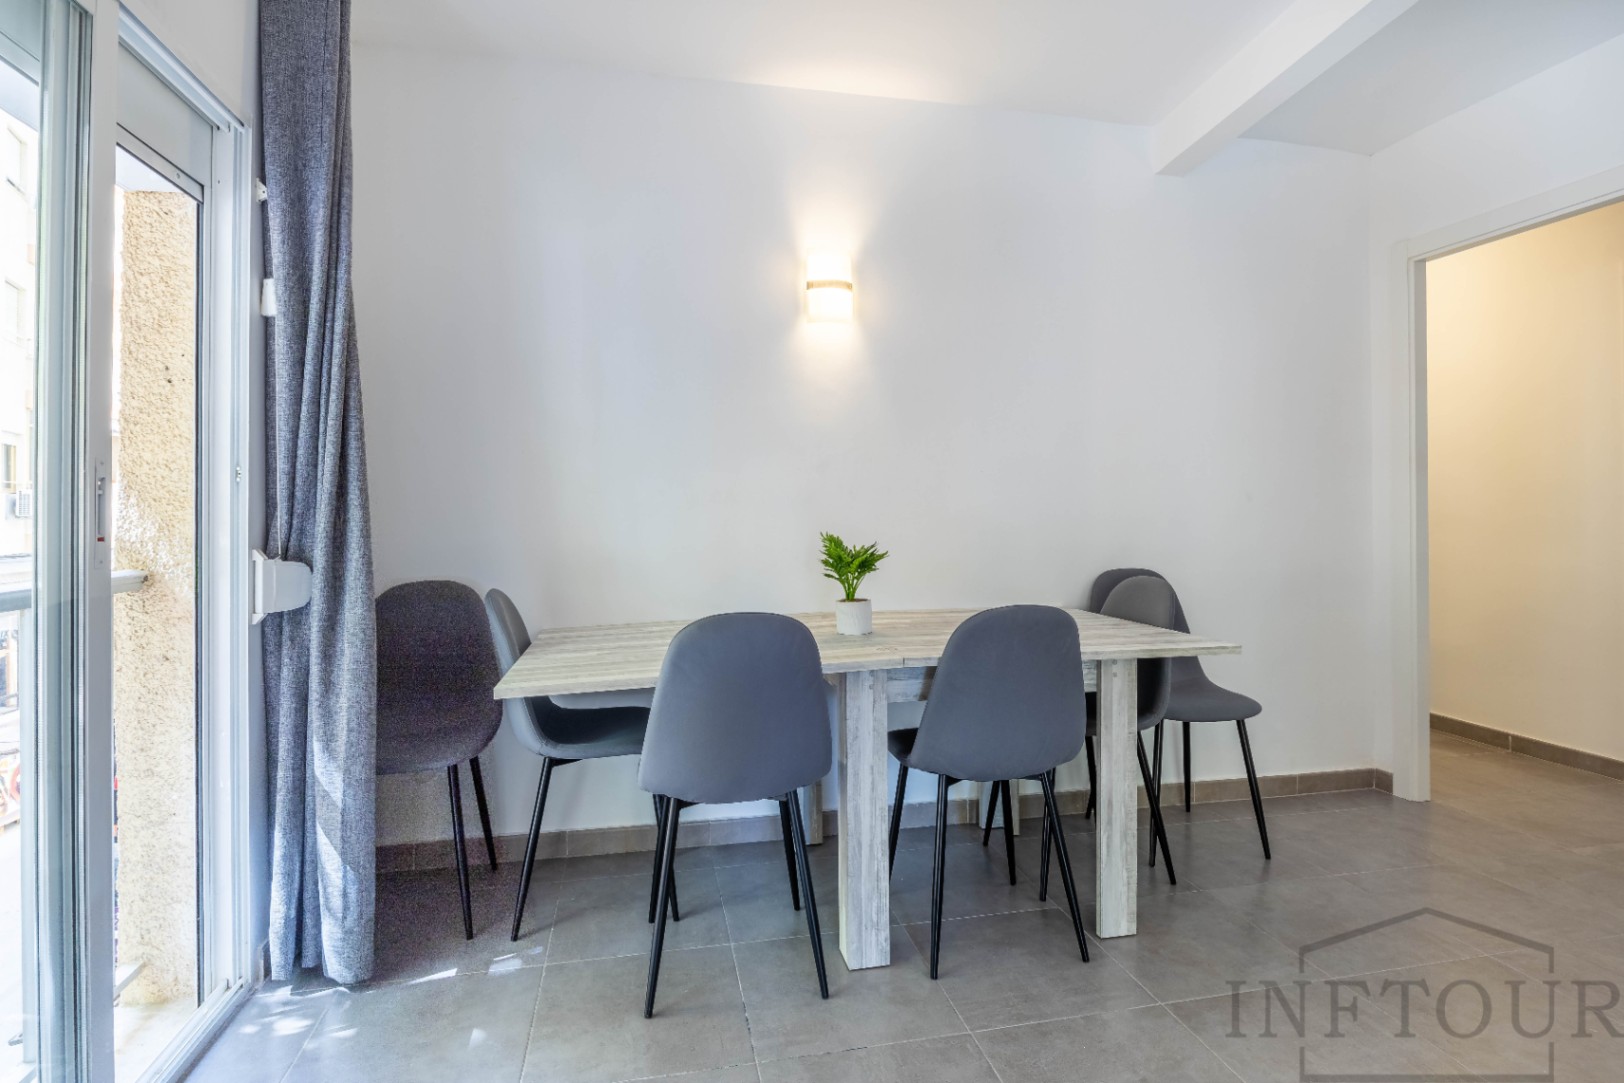 Tourist Rental 3 bedroom apartment in the centre of Calpe